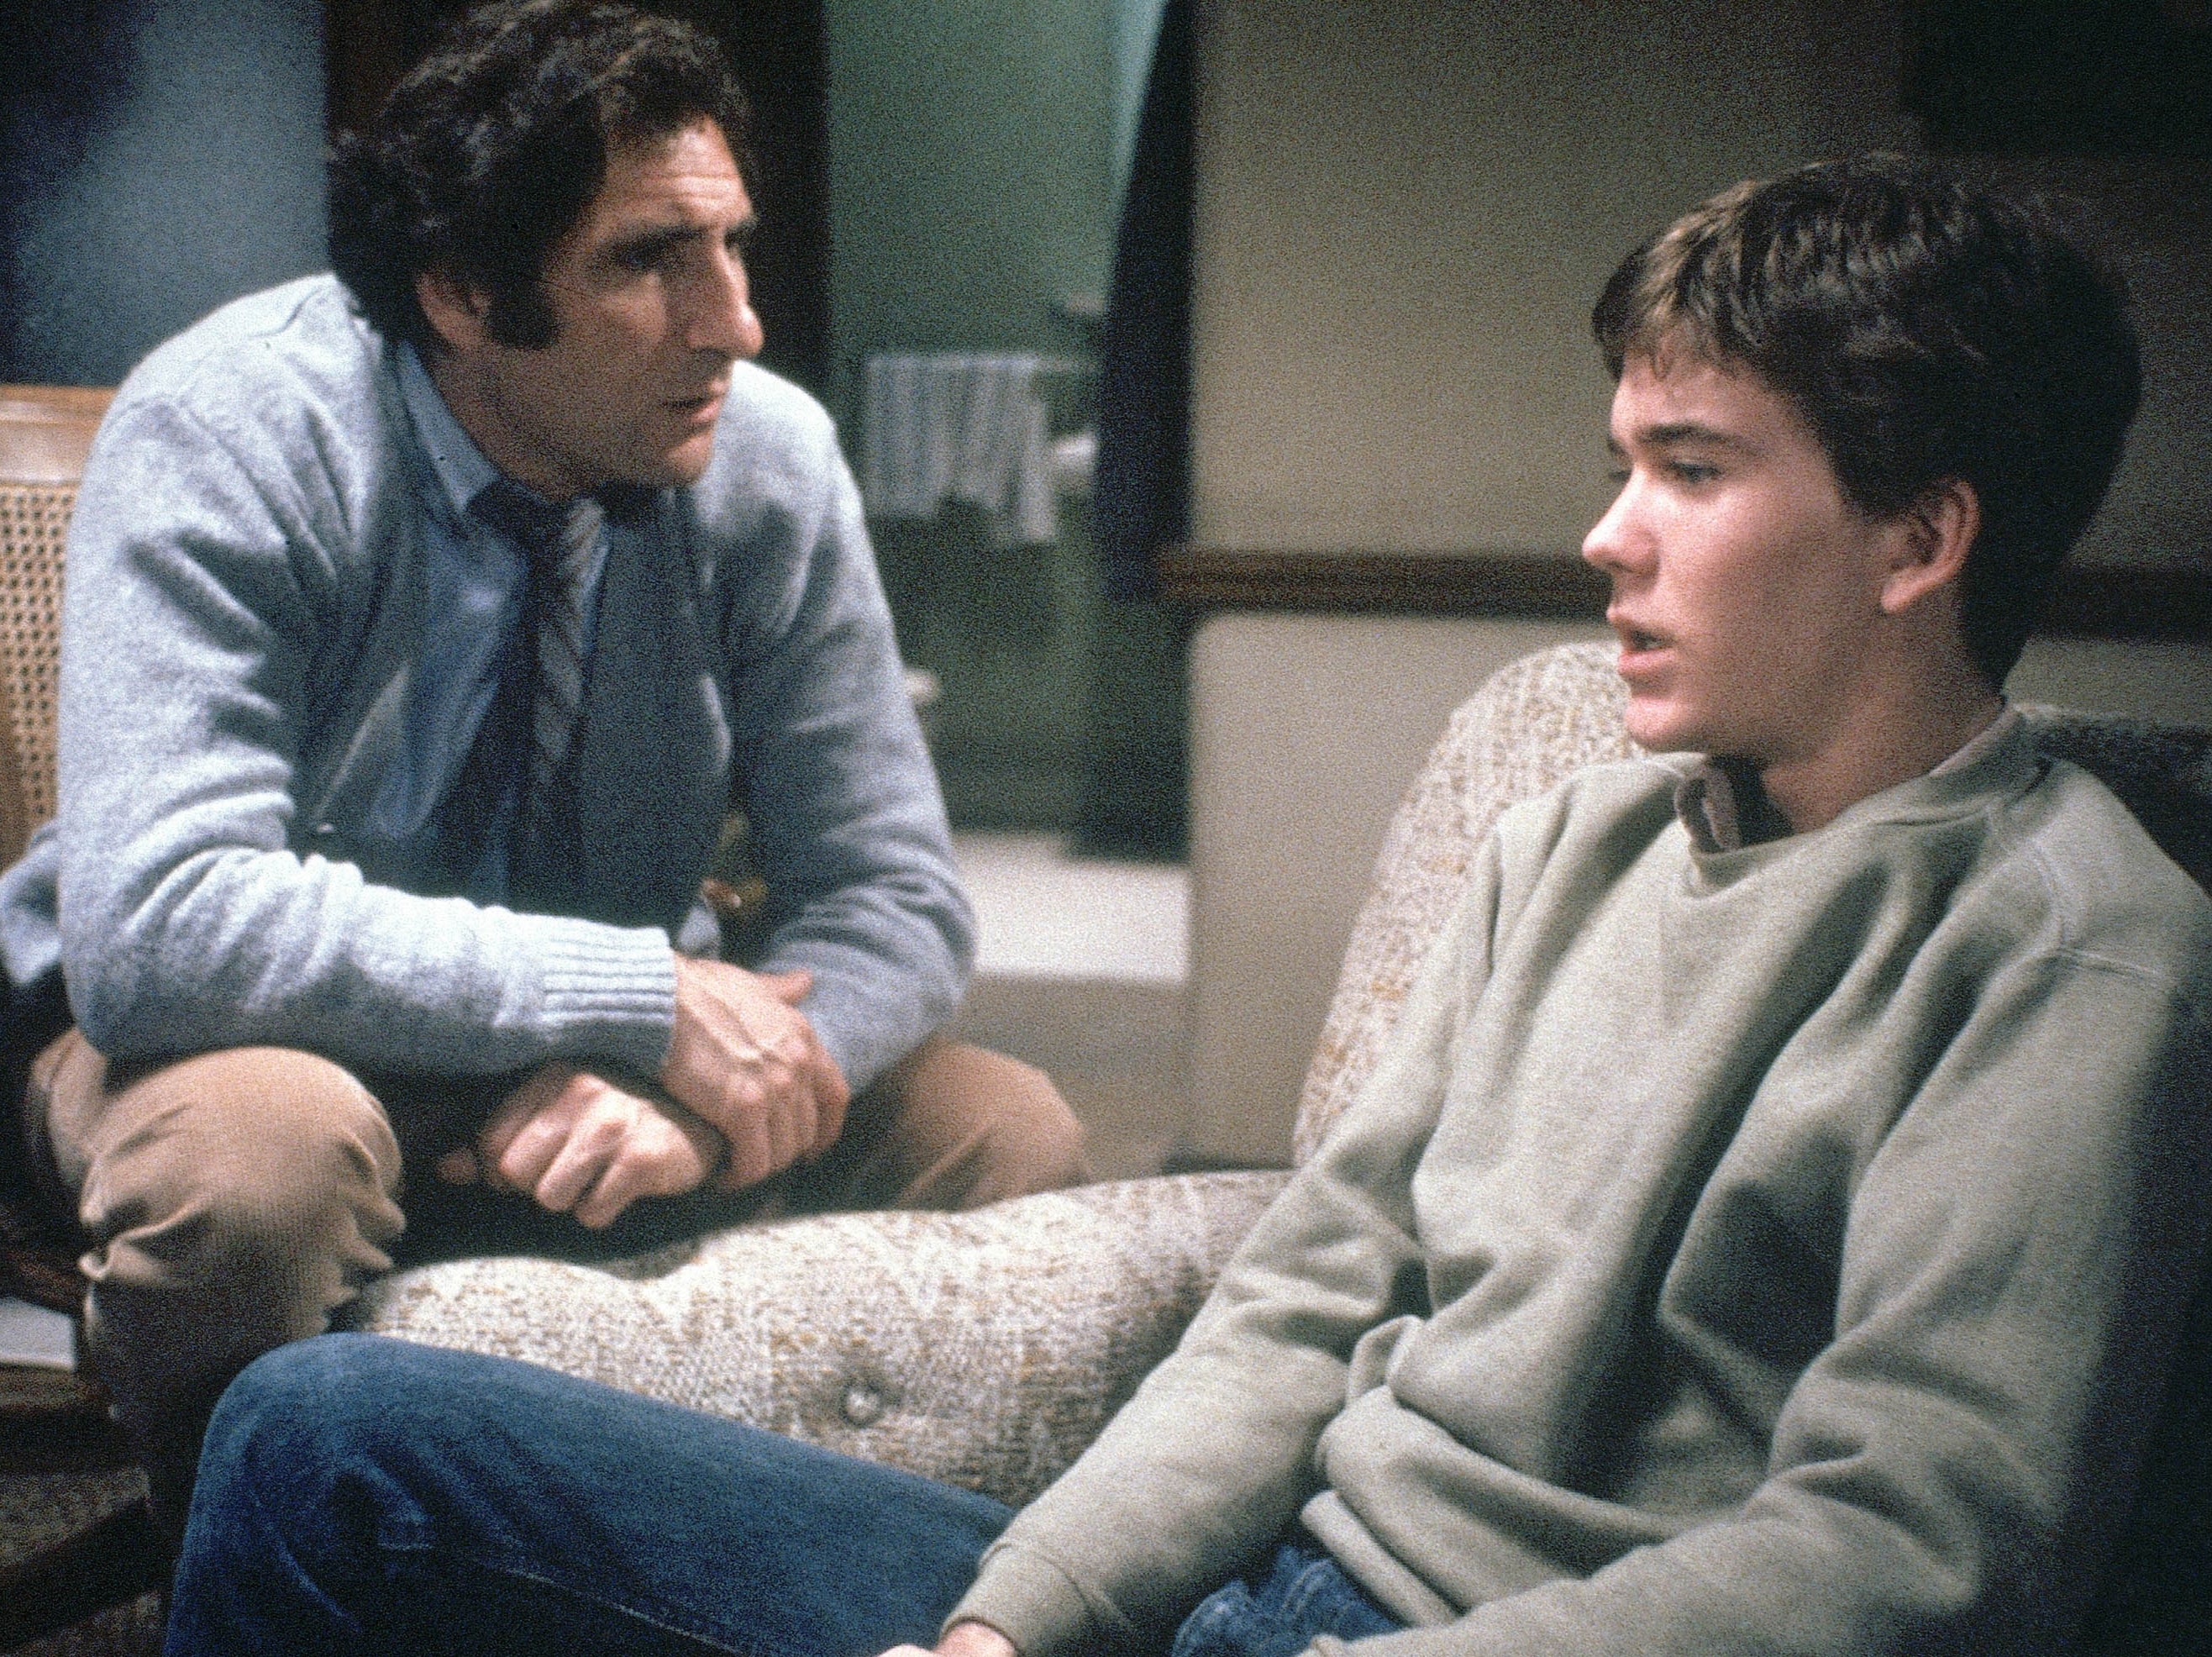 Talking it through: Judd Hirsch and Timothy Hutton in ‘Ordinary People’